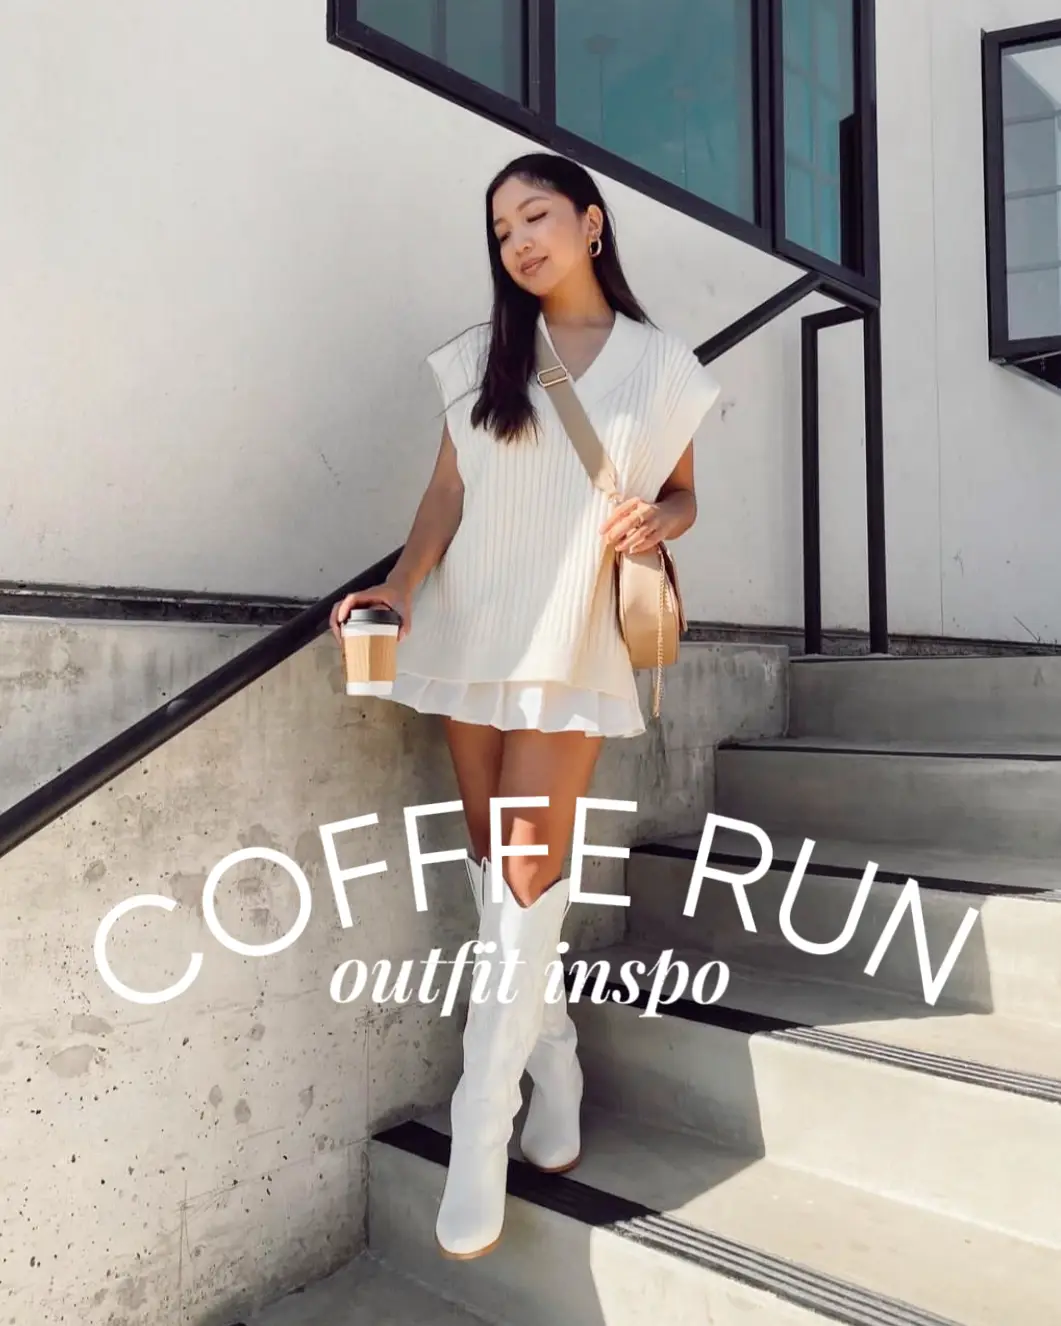 Minimal coffee run outfit idea ☕️'s images